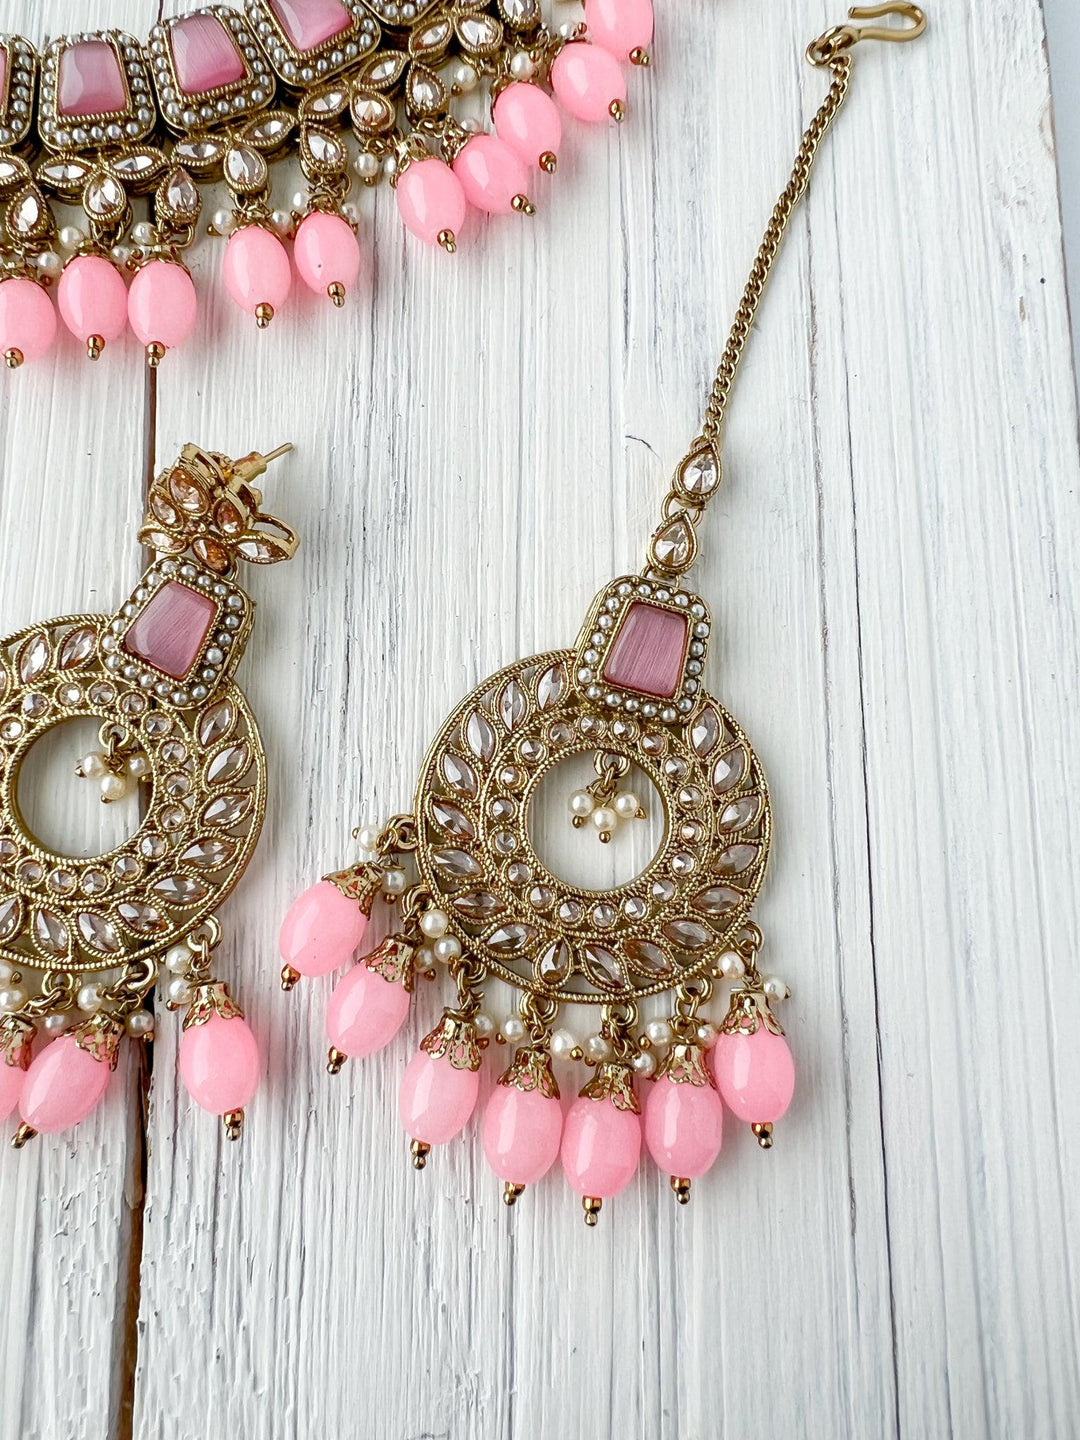 Second Glance in Pink Necklace Sets THE KUNDAN SHOP 